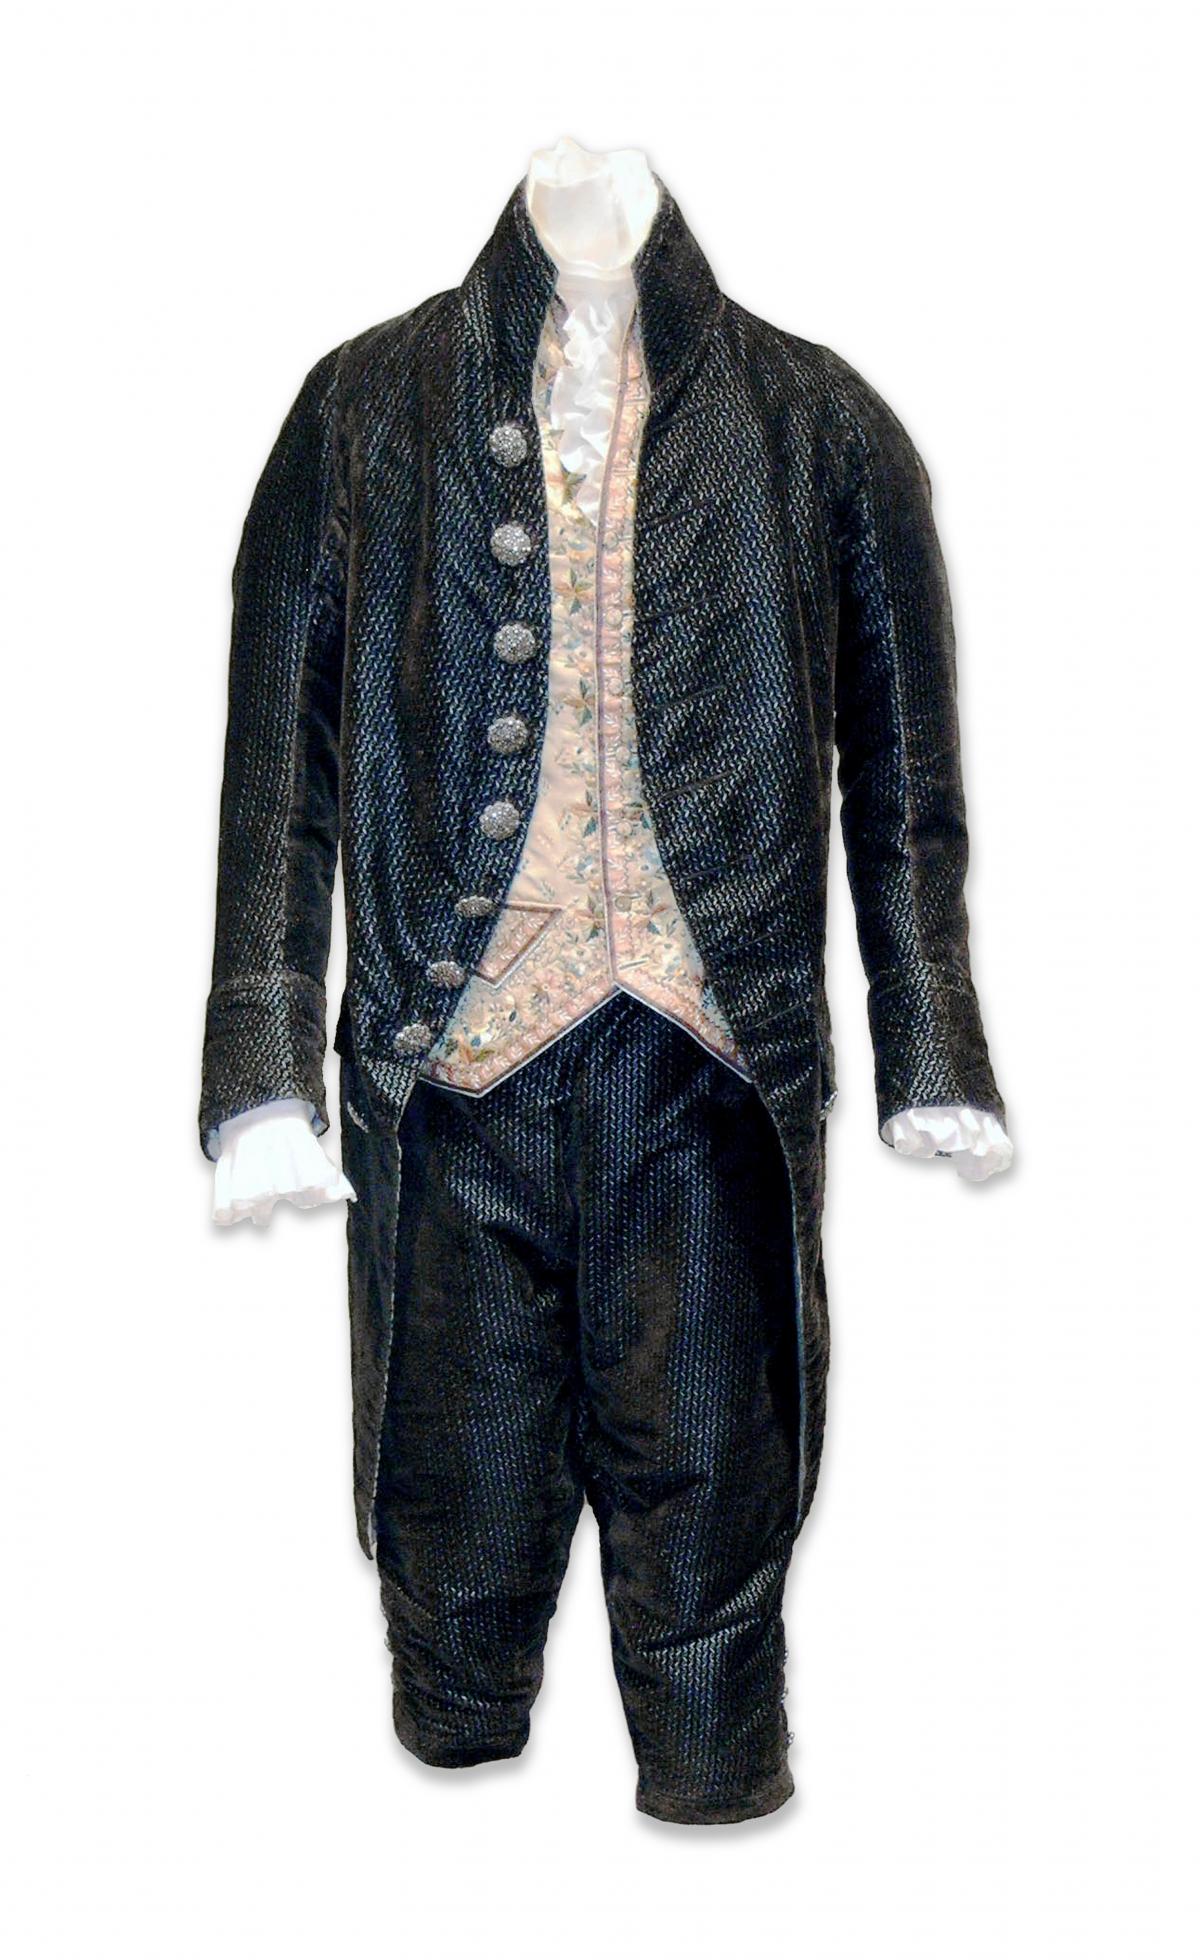 Dark blue velvet suit and trousers, with a pale pink floral embroidered waistcoat underneath, on a mannequin